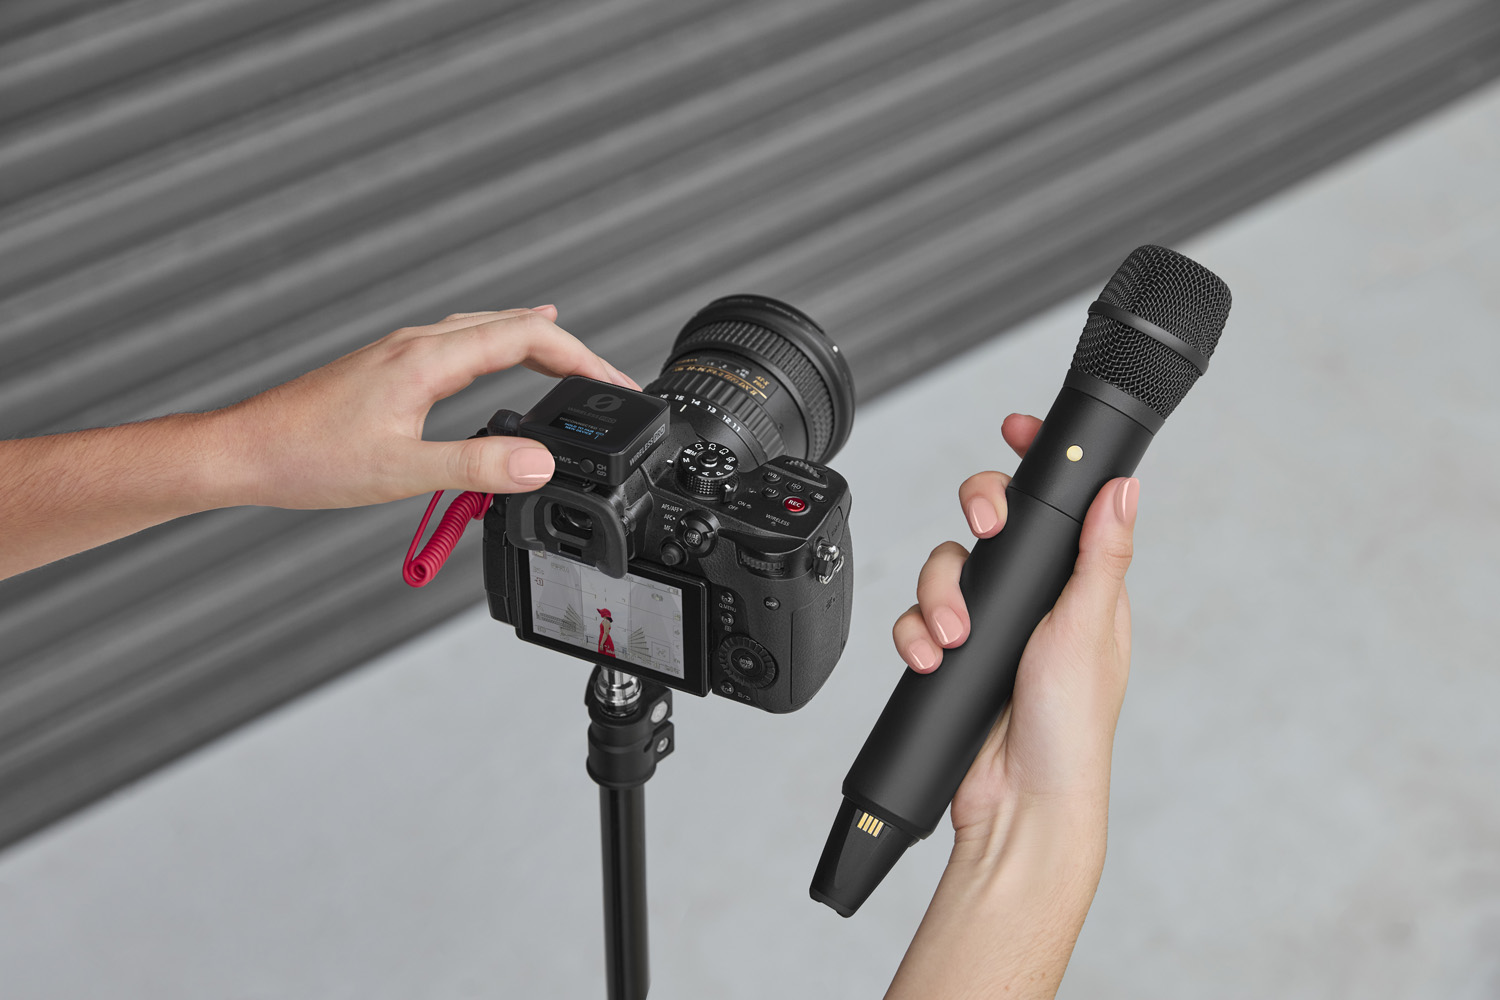 Close-up of a hand holding the RØDE Interview PRO wireless handheld microphone near a DSLR camera mounted on a tripod, highlighting the pairing process between the microphone and the camera